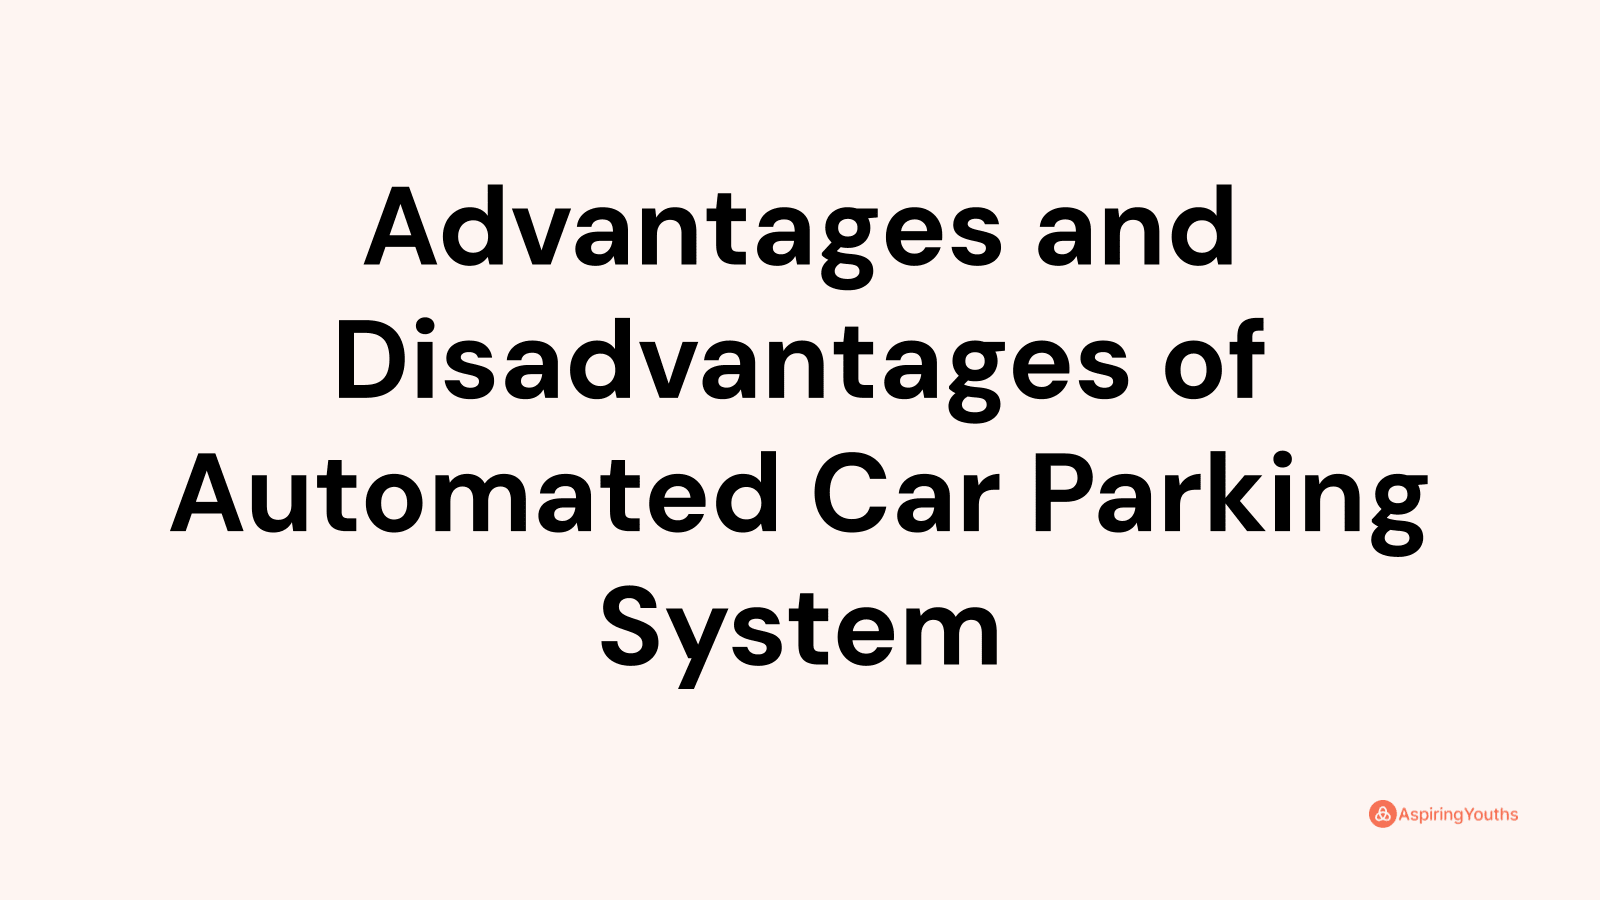 Advantages and disadvantages of Automated Car Parking System